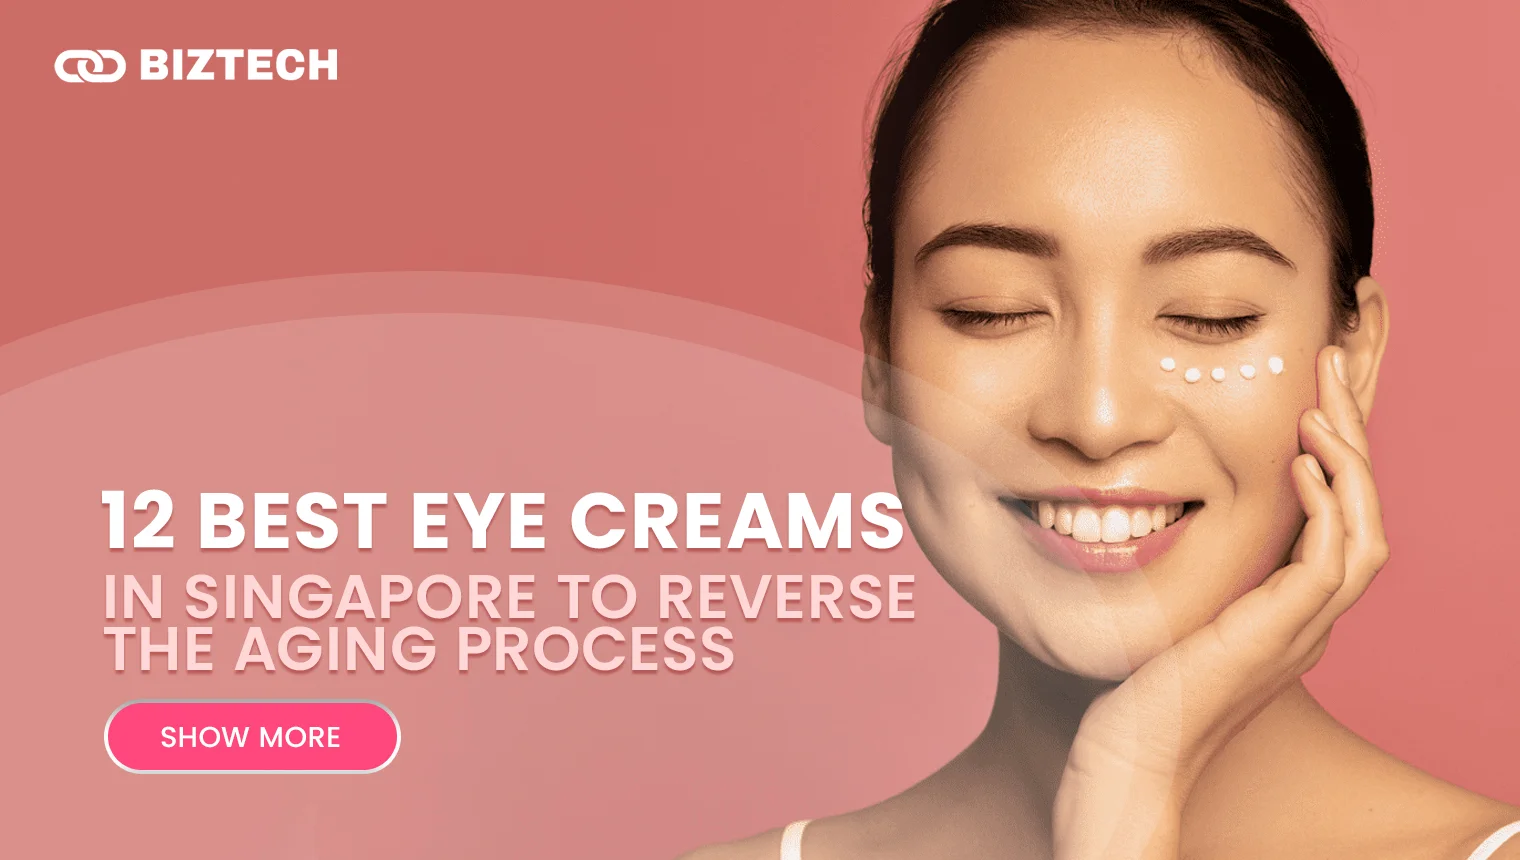 12 Best Eye Creams in Singapore To Reverse the Aging Process